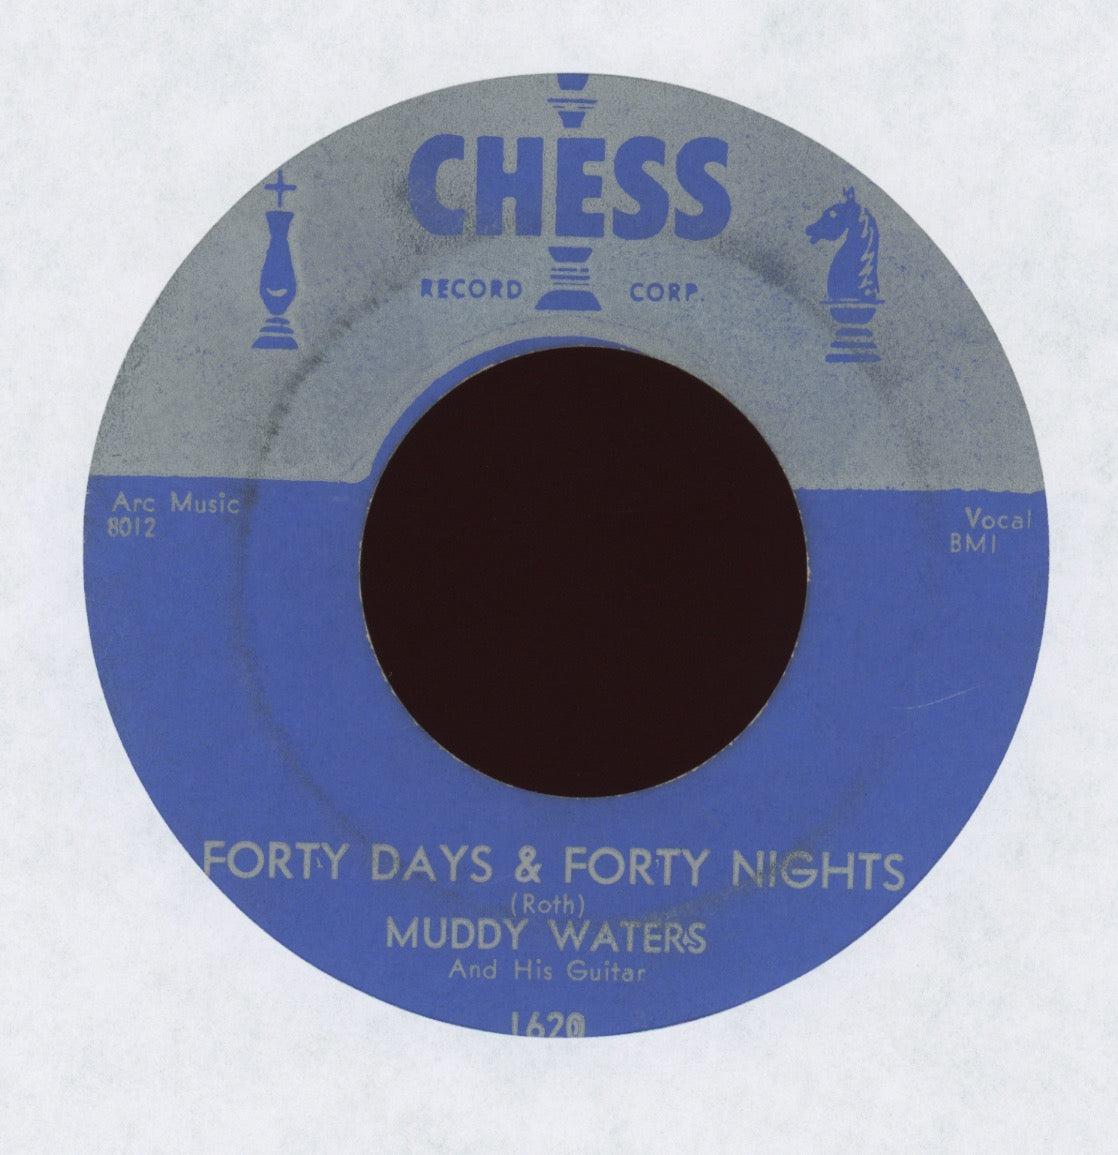 Muddy Waters - Forty Days & Forty Nights on Chess Silver Top